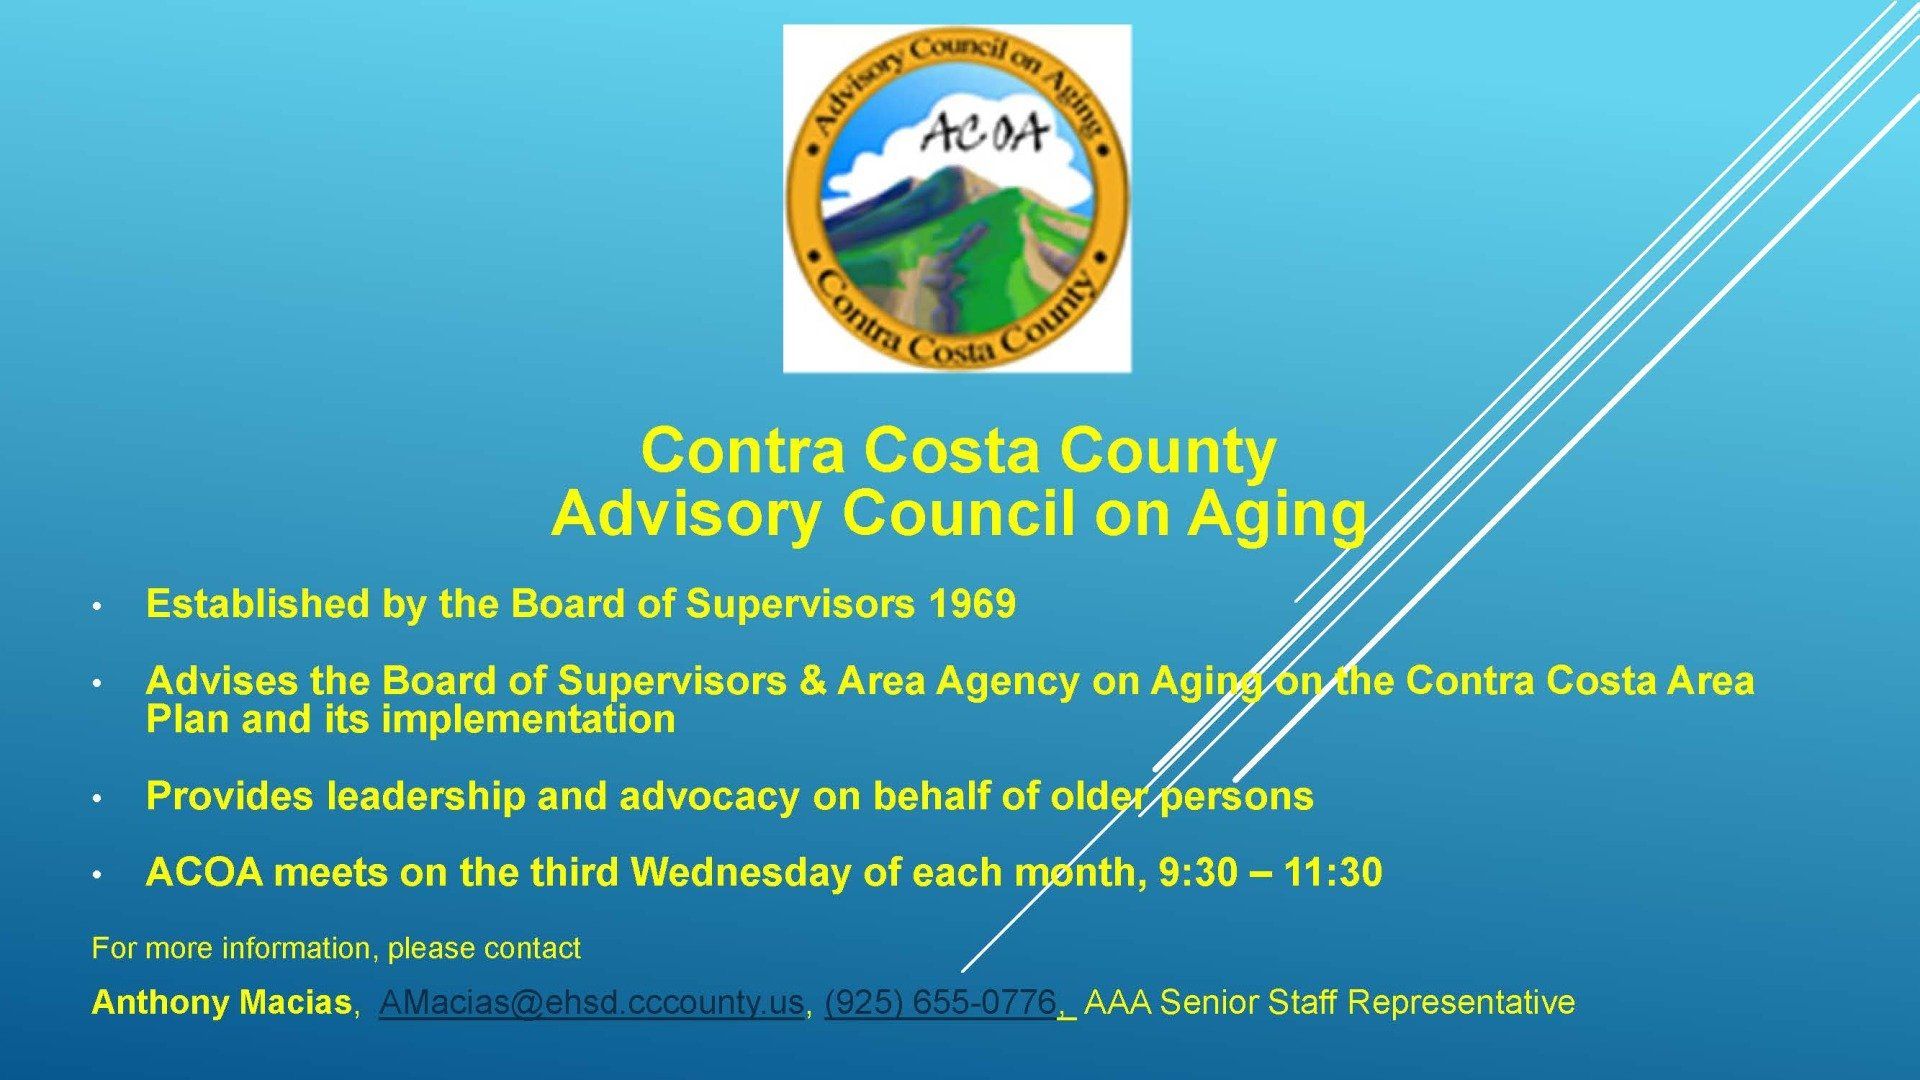 Slide 1 of the Contra Costa County Advisory Council on Aging's Presentation